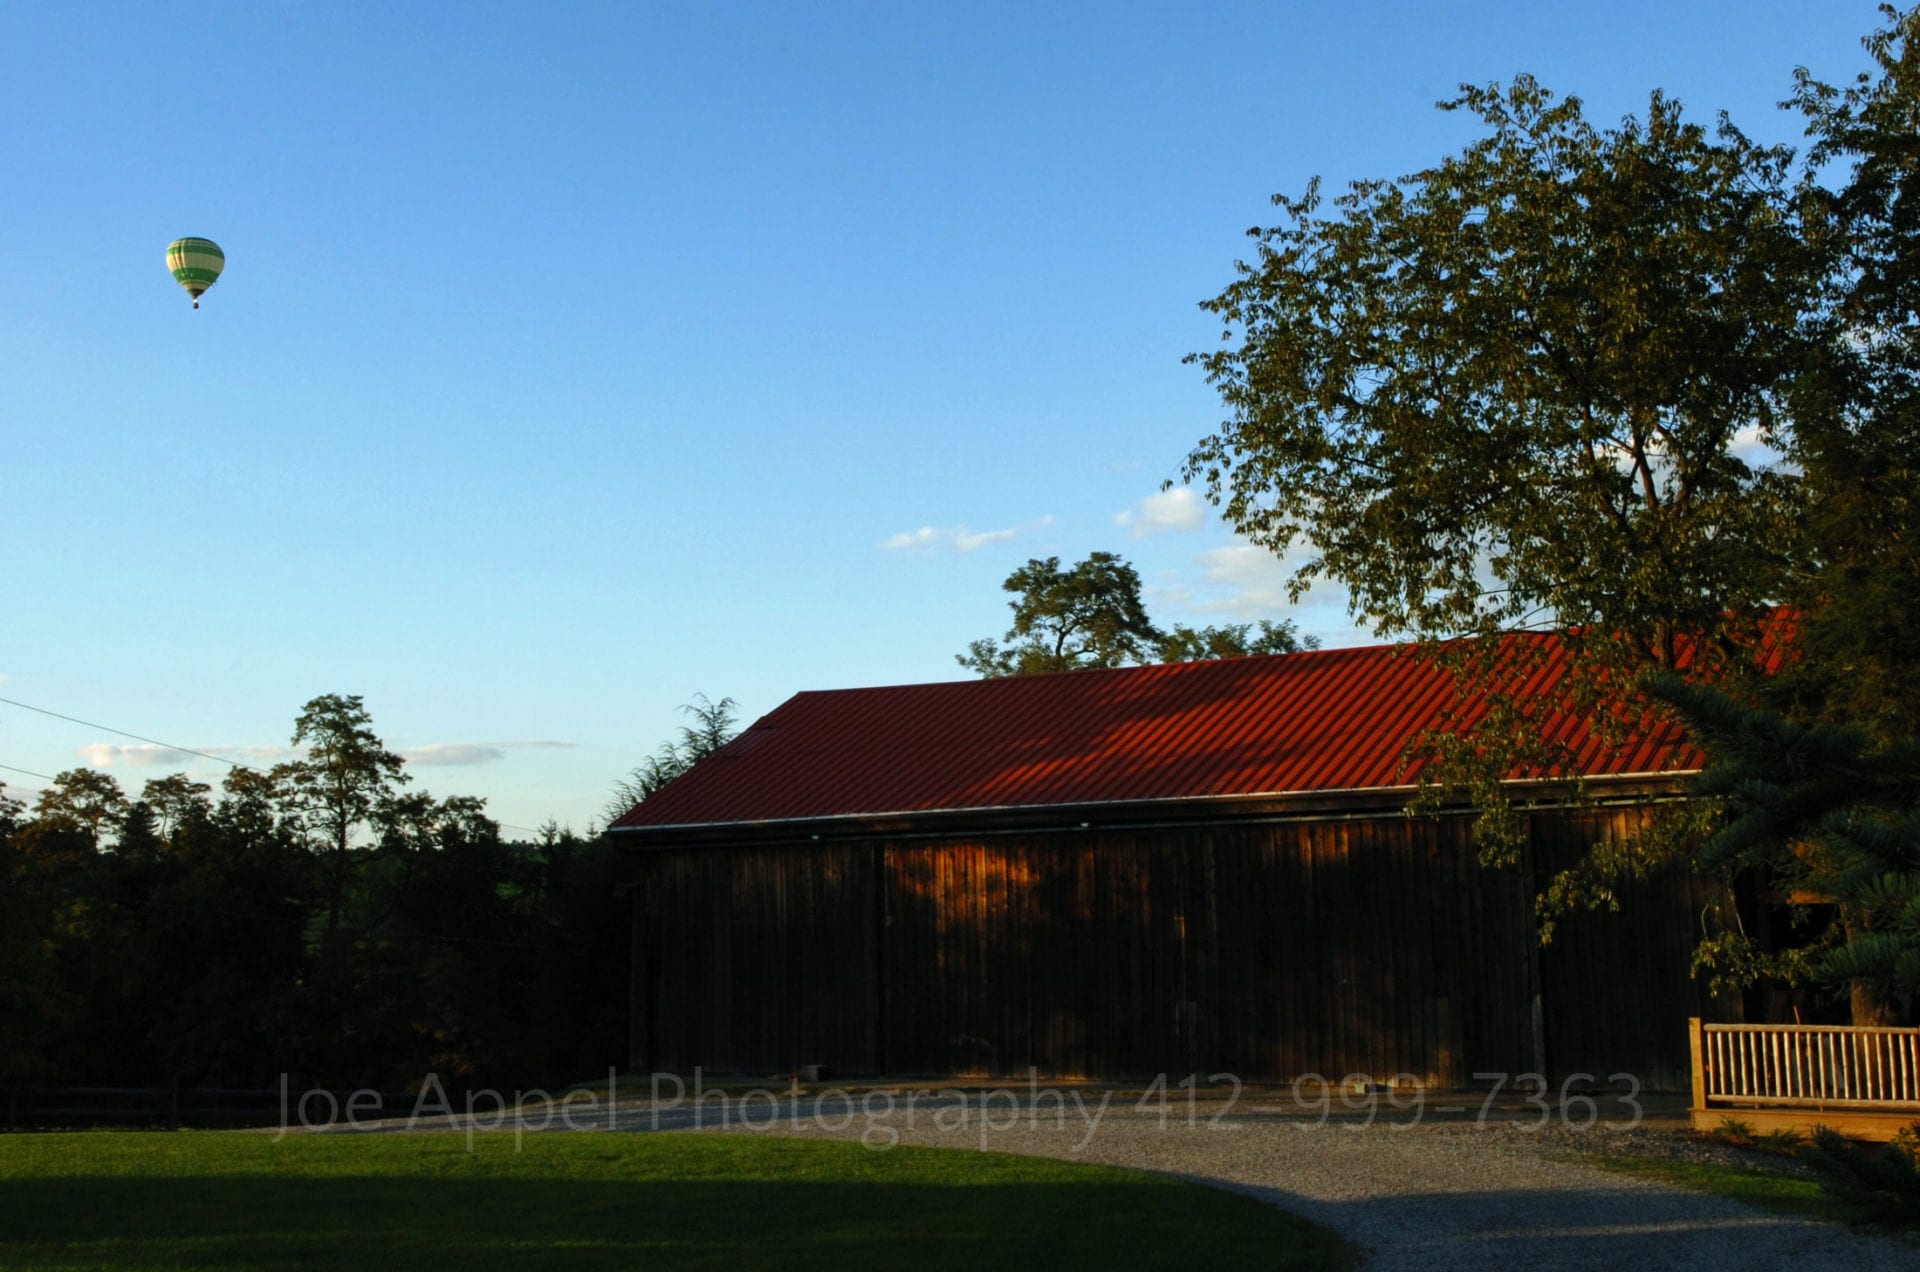 A hot air balloon floats in the blue sky high above a red-roofed barn. Armstrong Farms Weddings